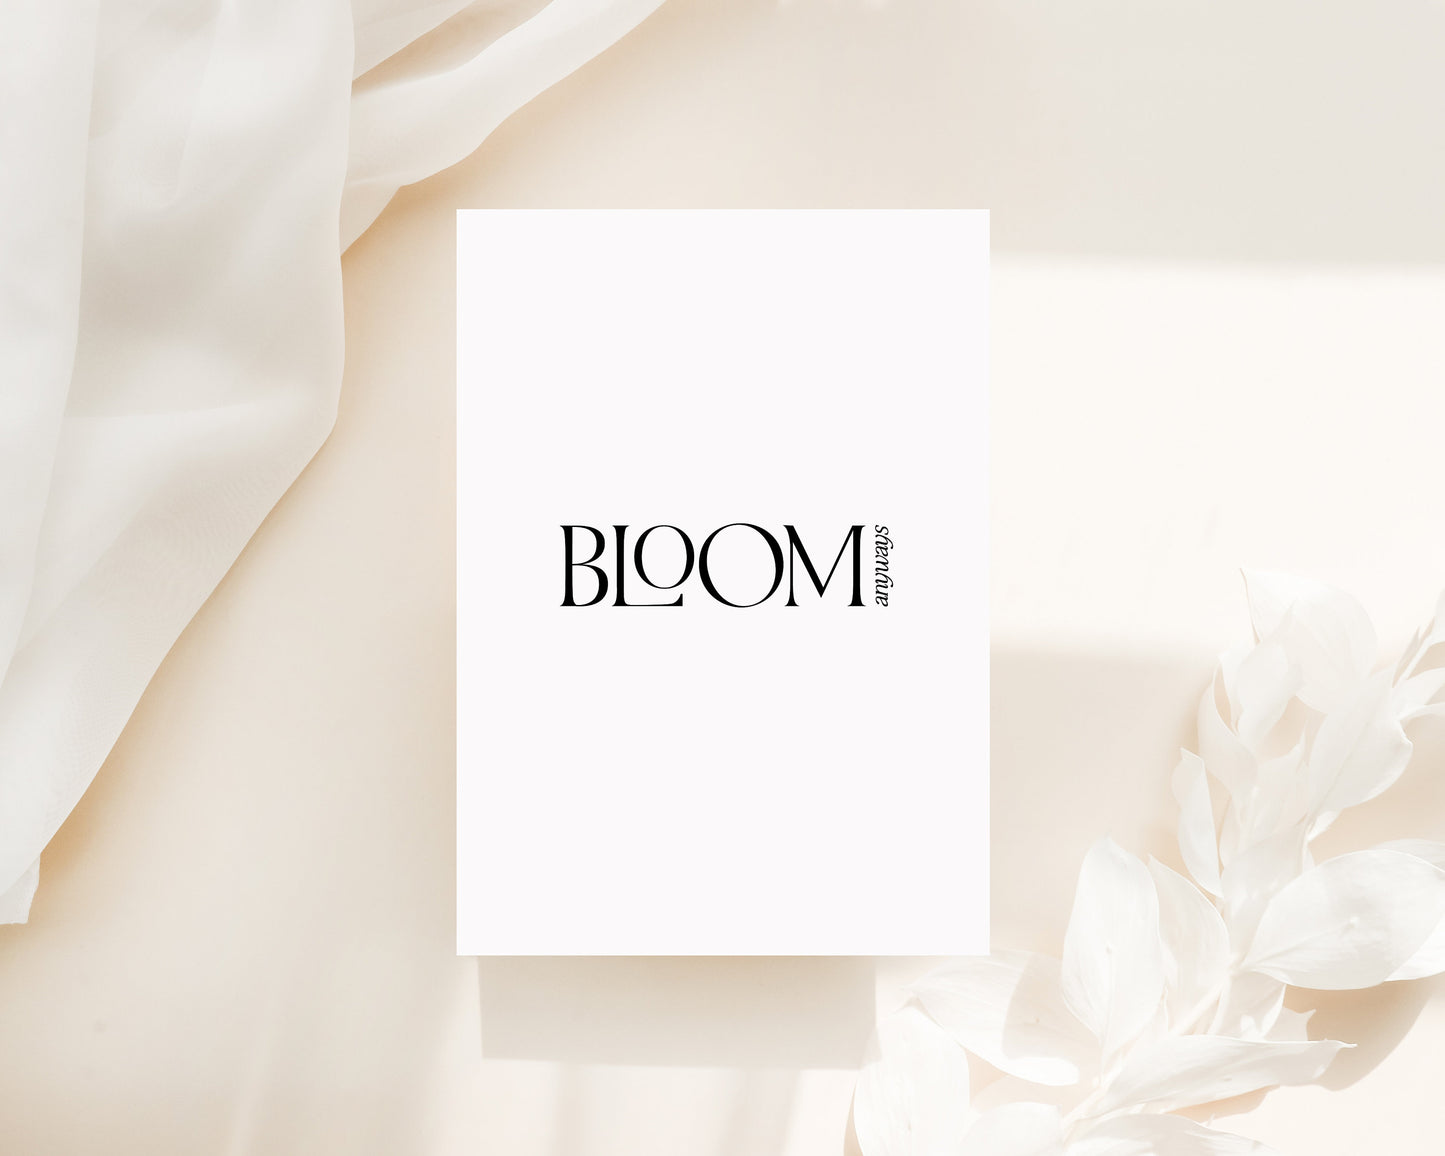 Bloom anyways,Floral card,Self-improvement card,Inspirational card,Motivational saying,Encouragement card,Personal growth,Self-growth